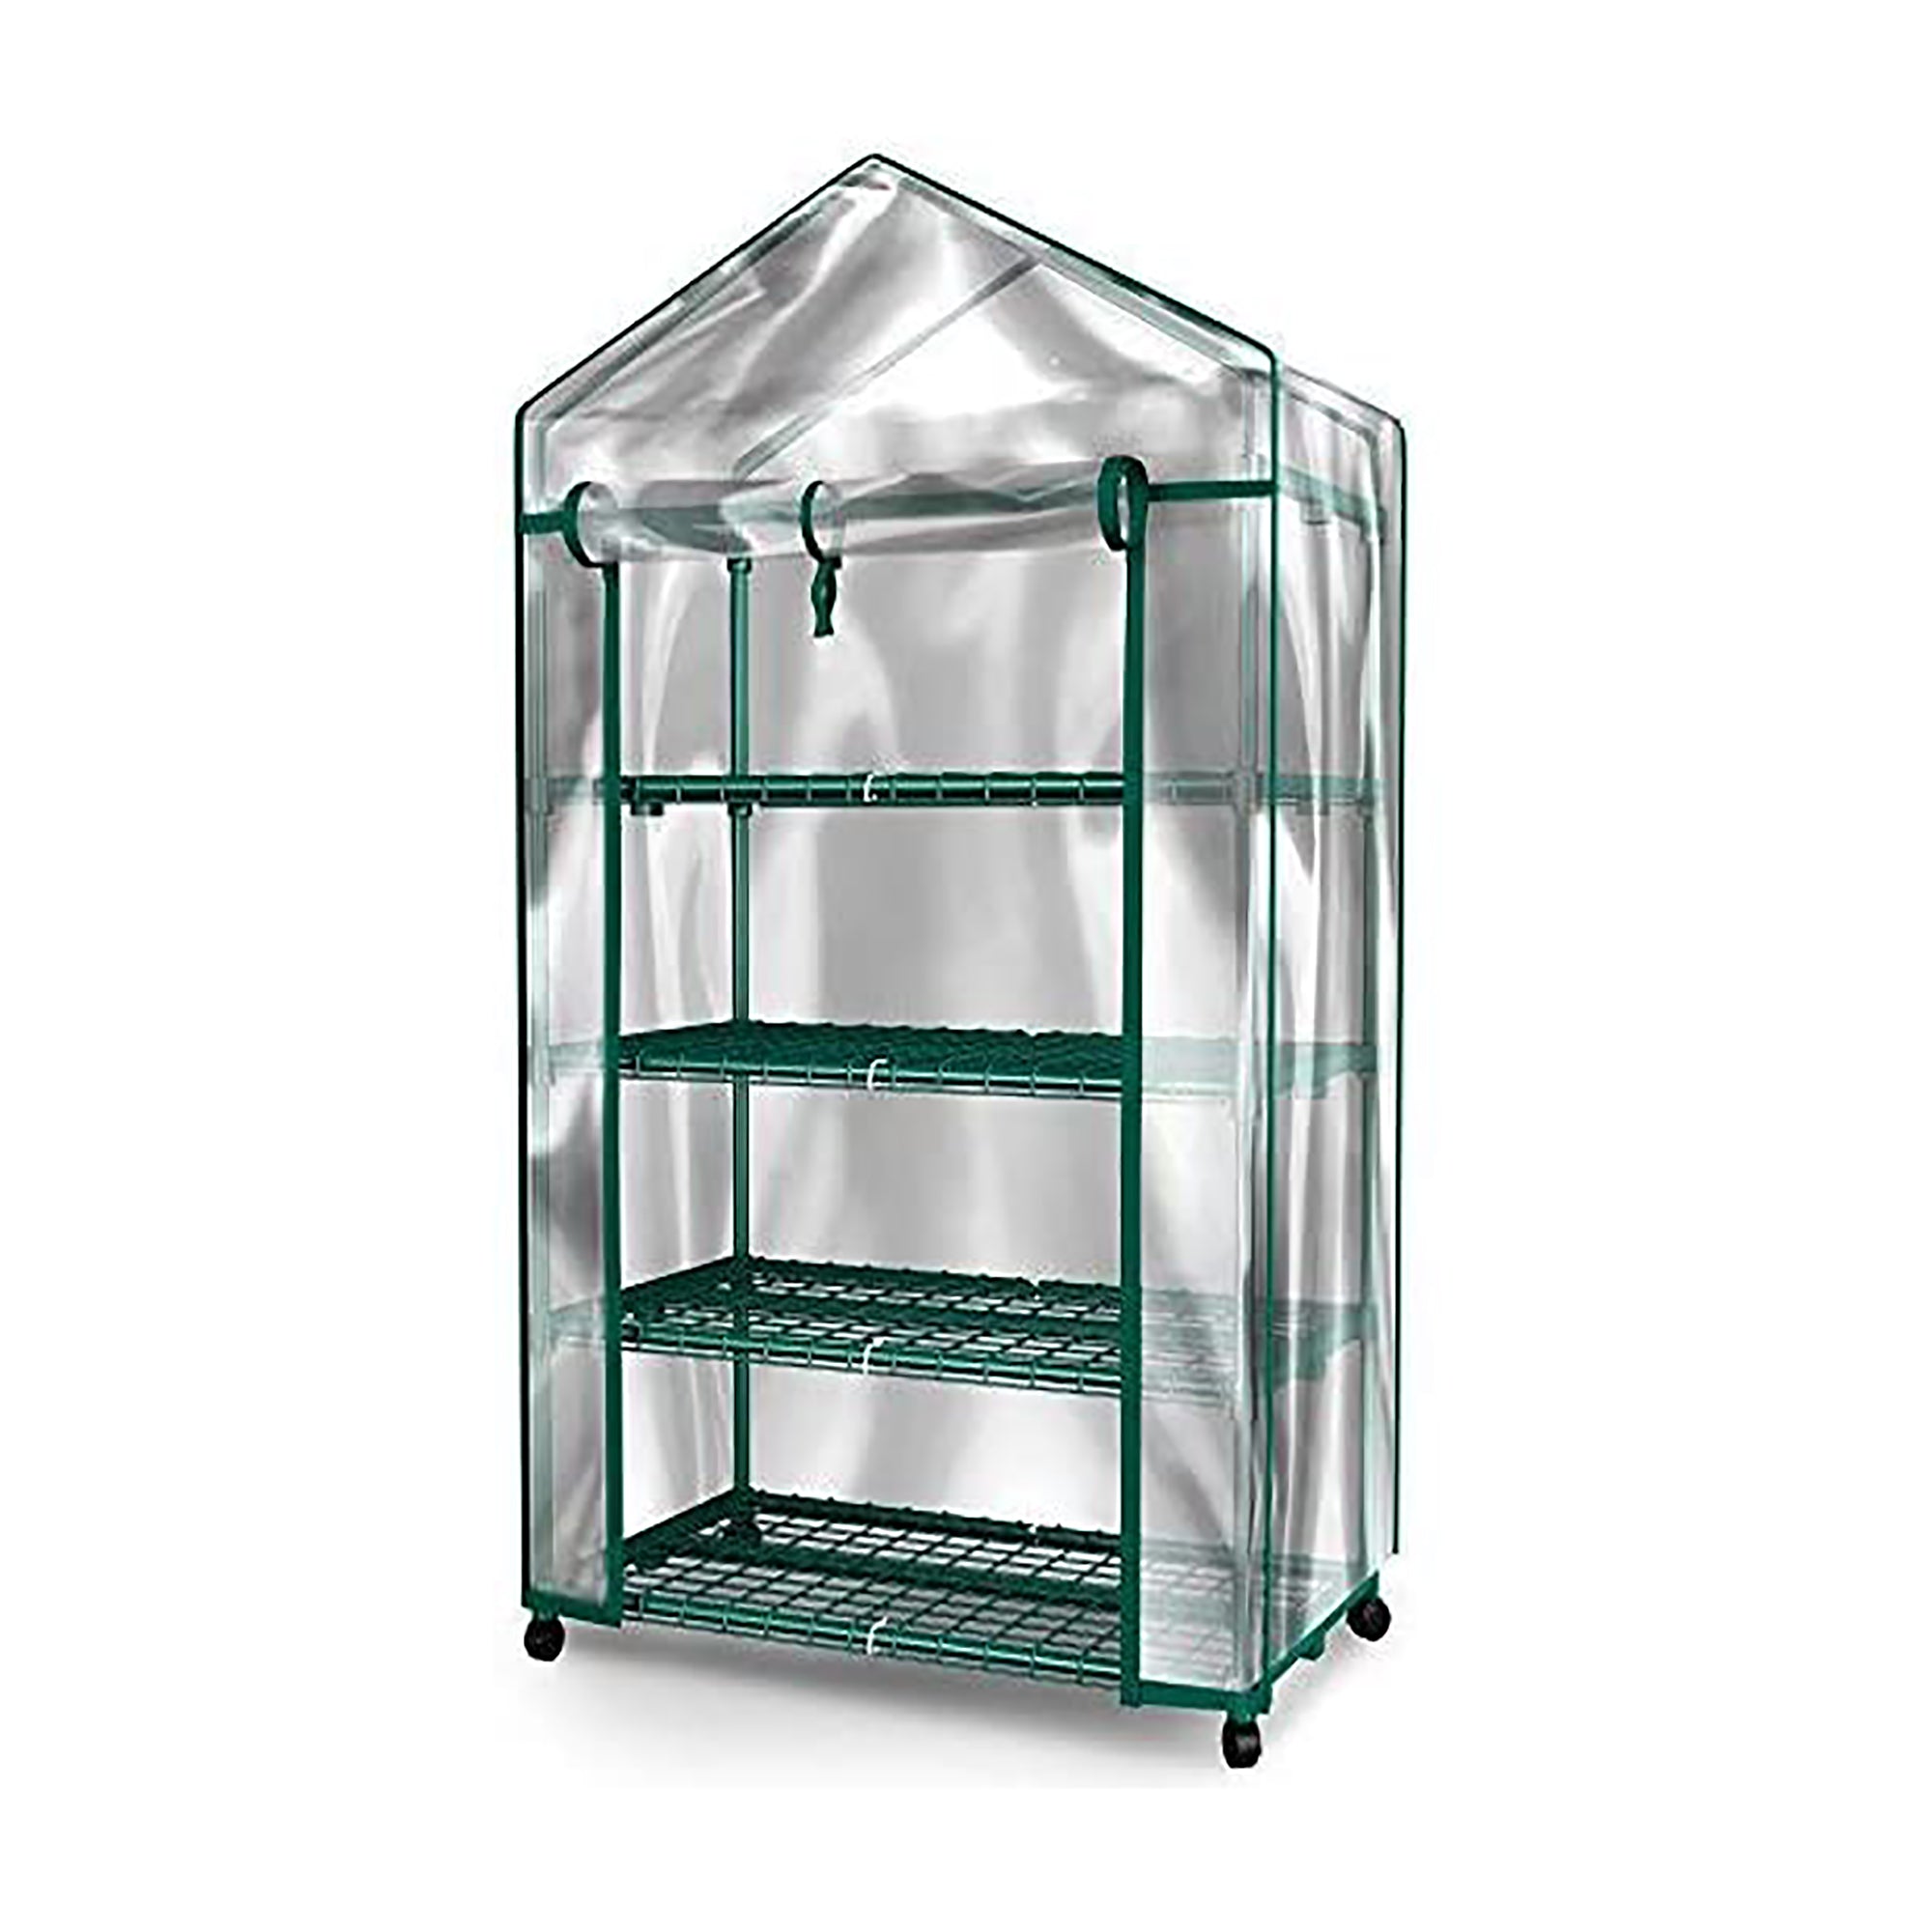 Mini Greenhouse - 4 Tiers Indoor Outdoor Greenhouse With wheels-Use in Any Season for Plants-Boyel Living